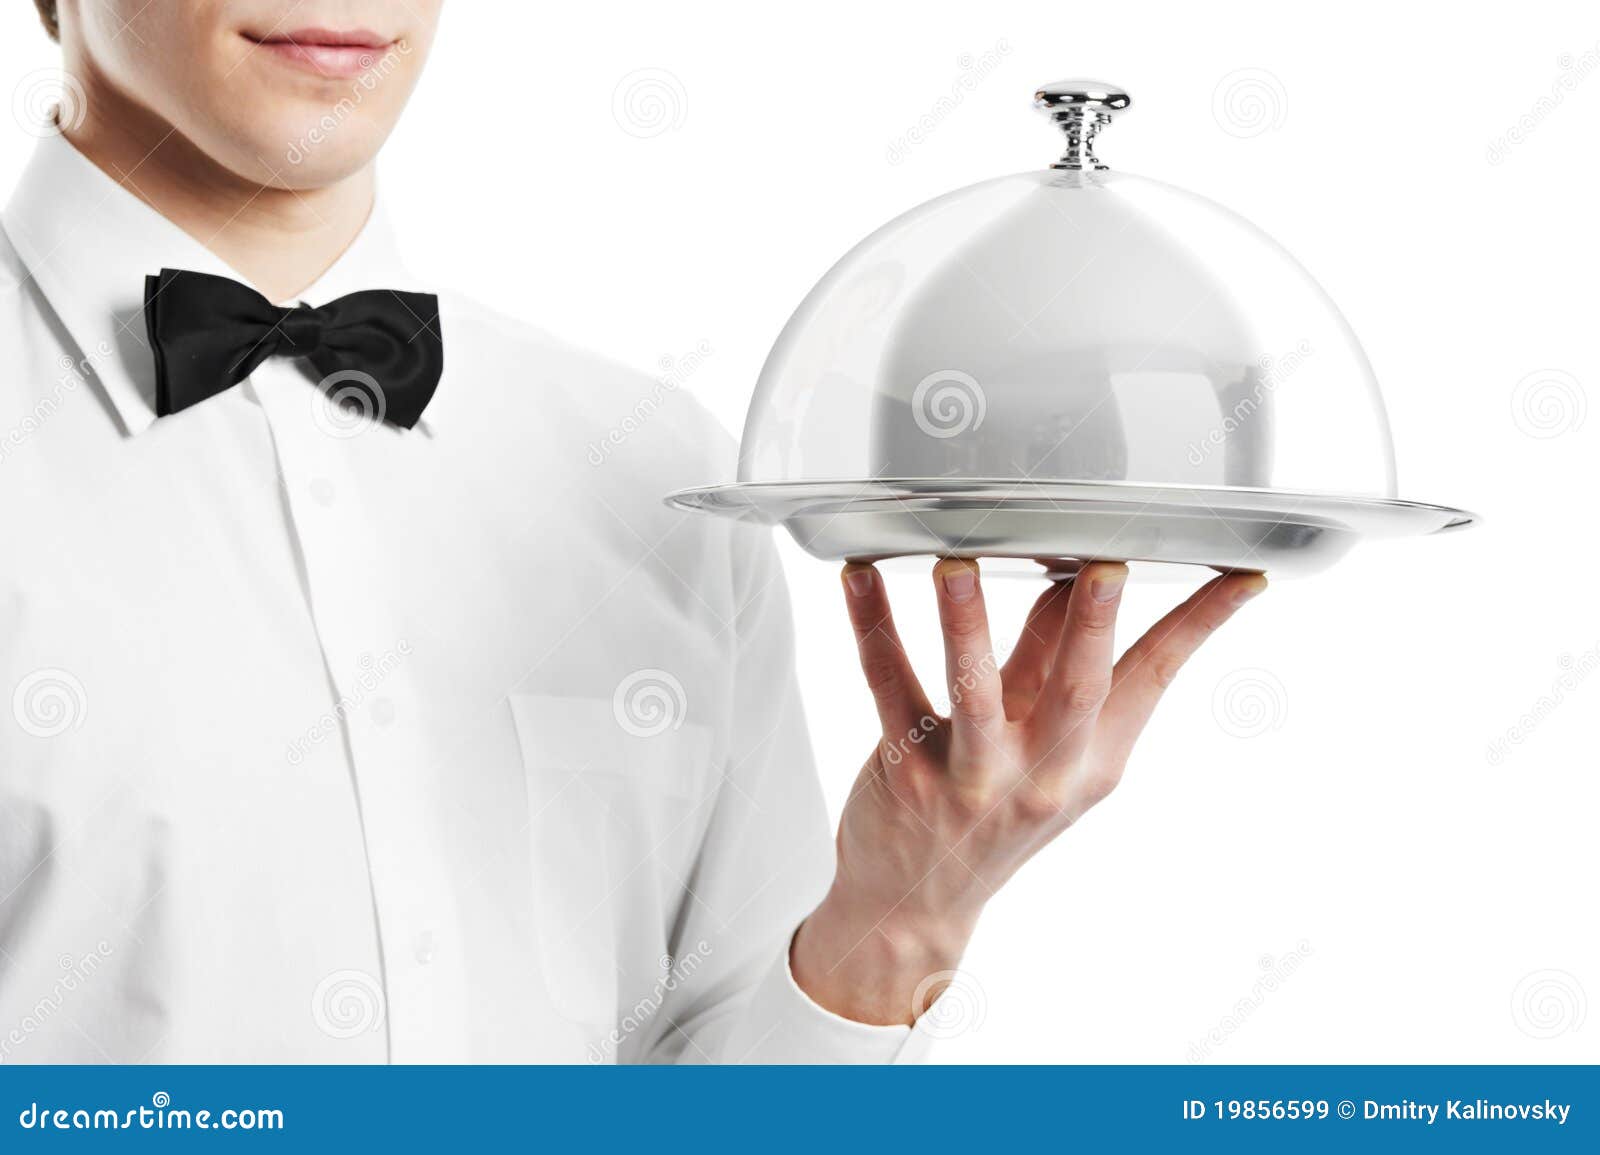 hand of waiter with cloche lid